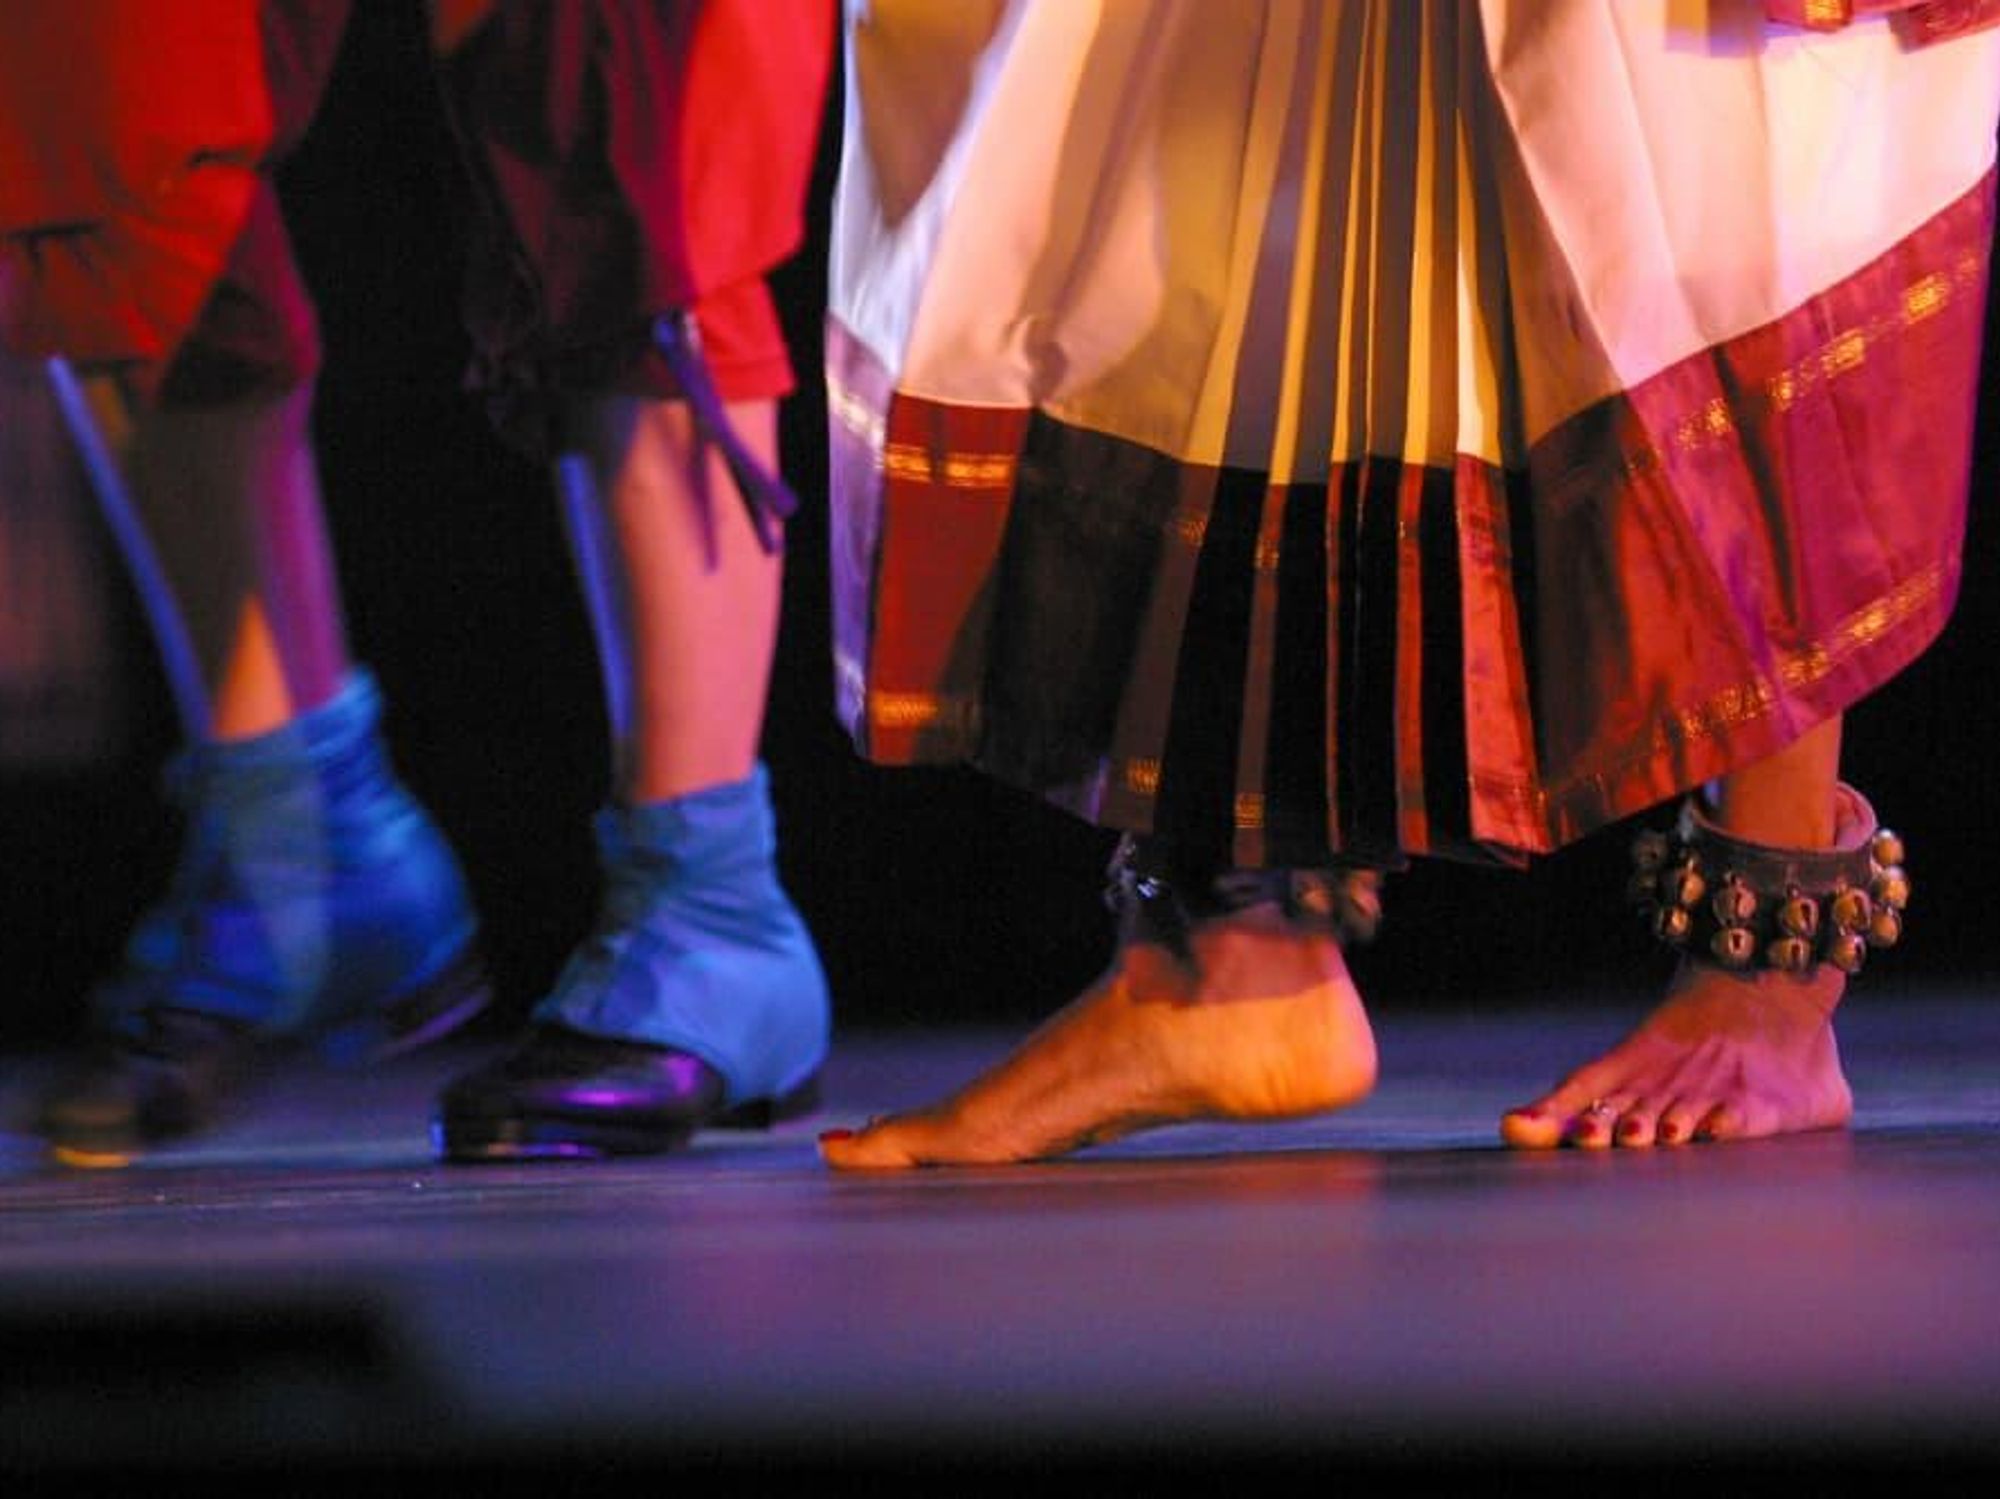 Two sets feet, traditionally adorned, dance onstage